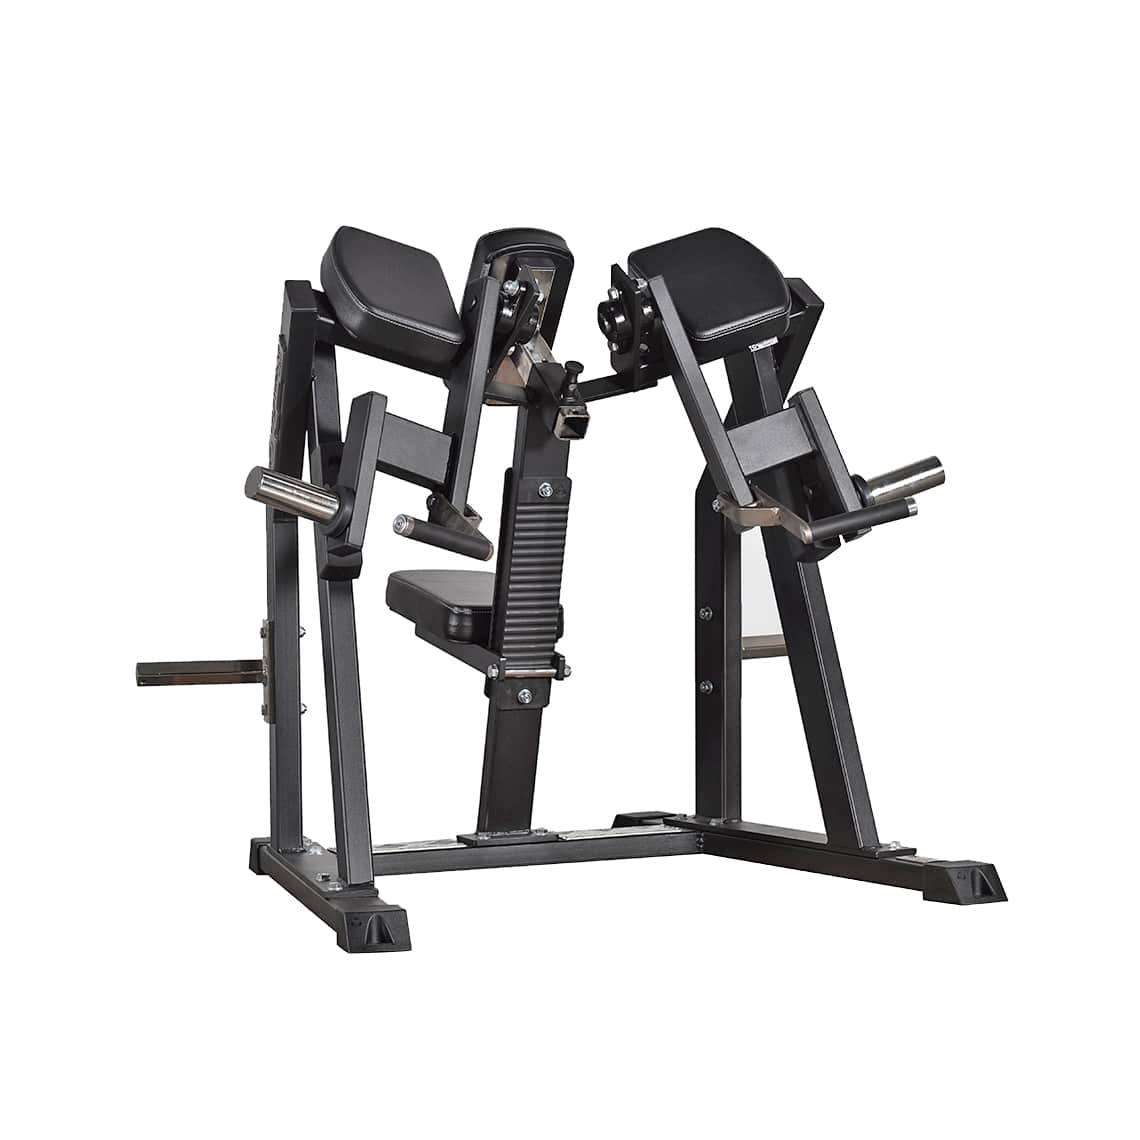 Biceps curl machine from gymleco, product picture with white background